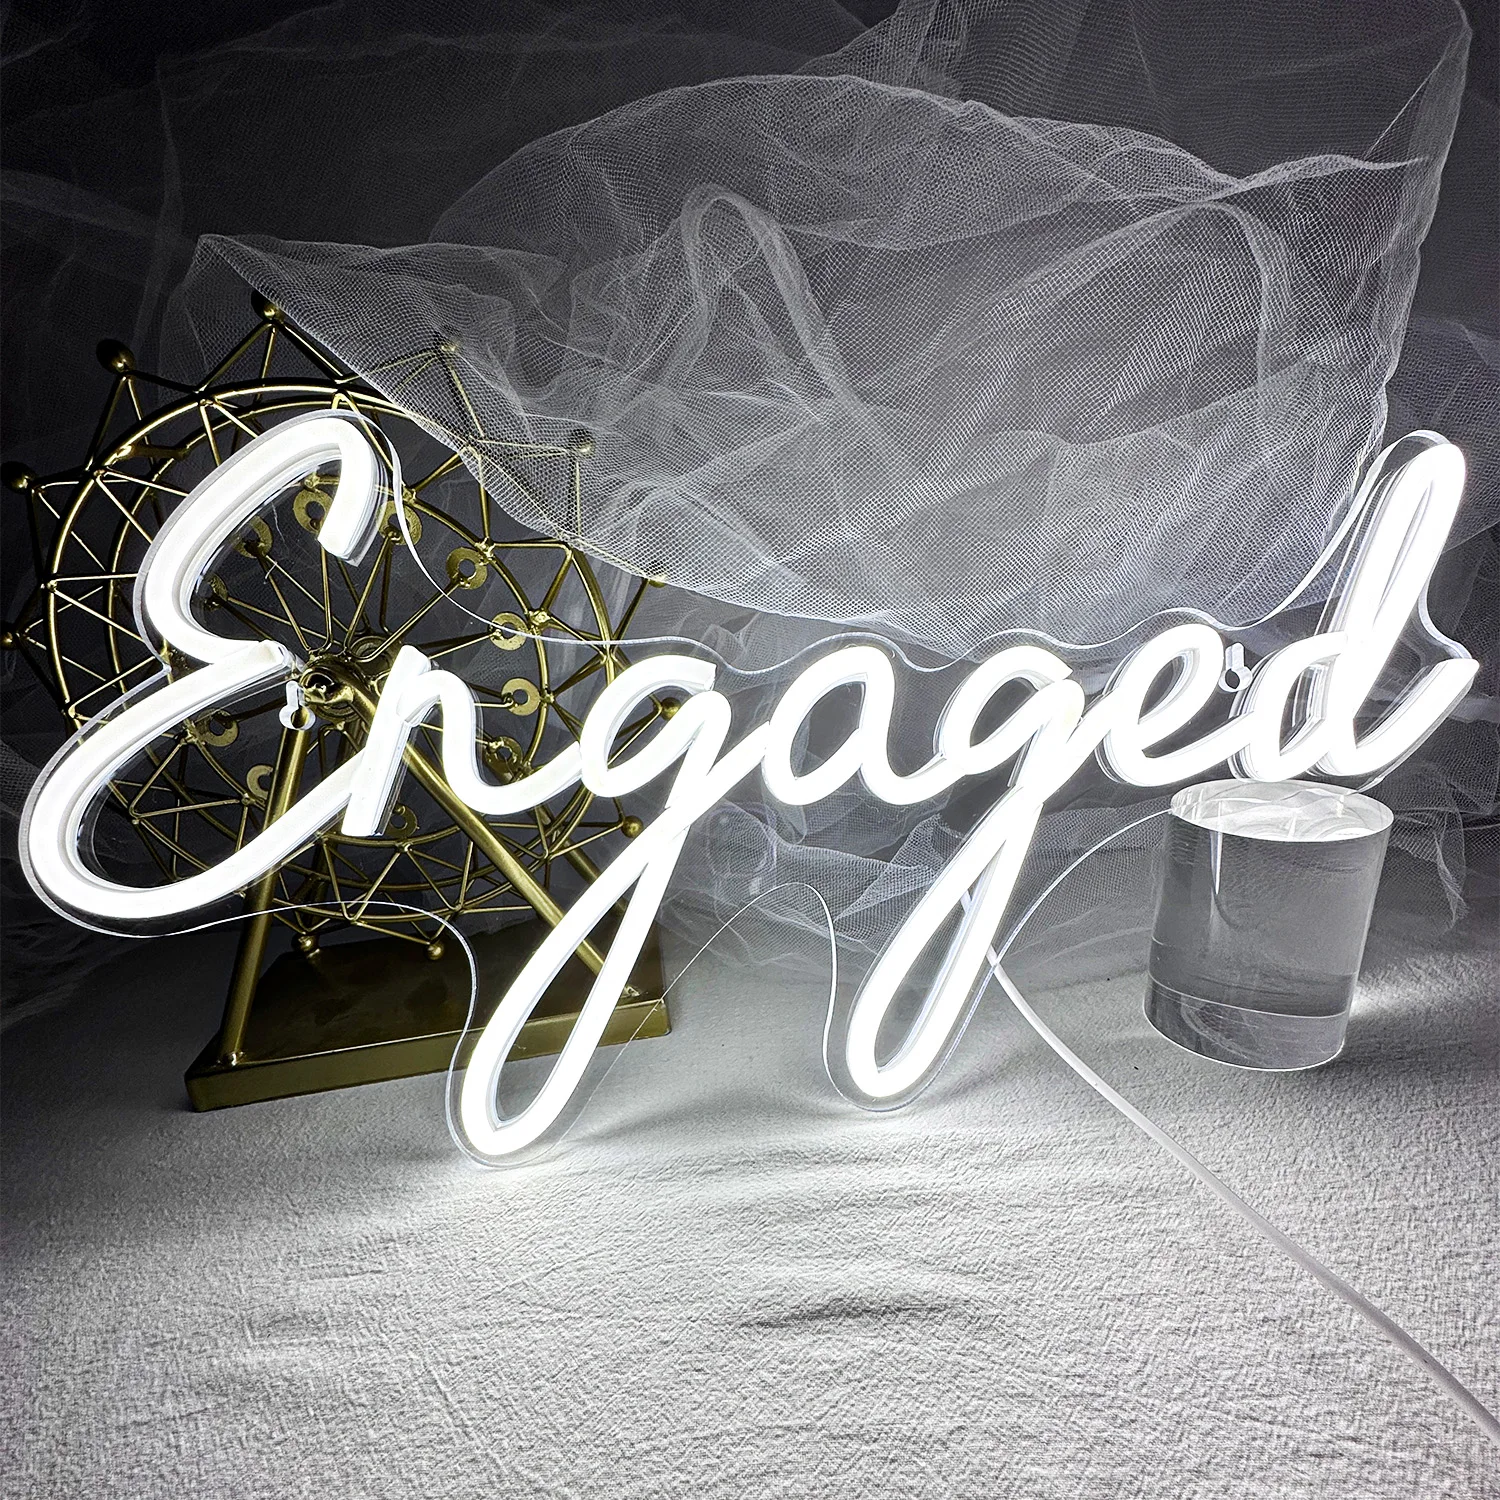 

Engaged Wedding Neon Sign wedding Led Light Bedroom Art Wall Decoration Anniversary Engagement party Proposal Gift Lamps adorn